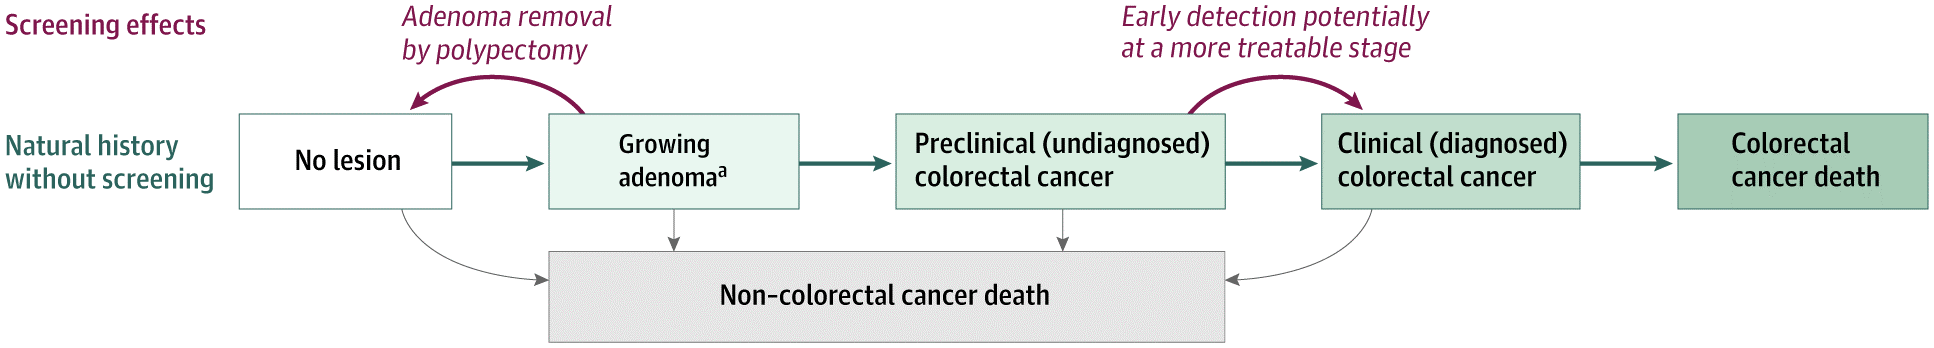 Flowchart showing how the simulation model of colorectal cancer (SimCRC) simulates the natural history of colorectal cancer and the effects of screening